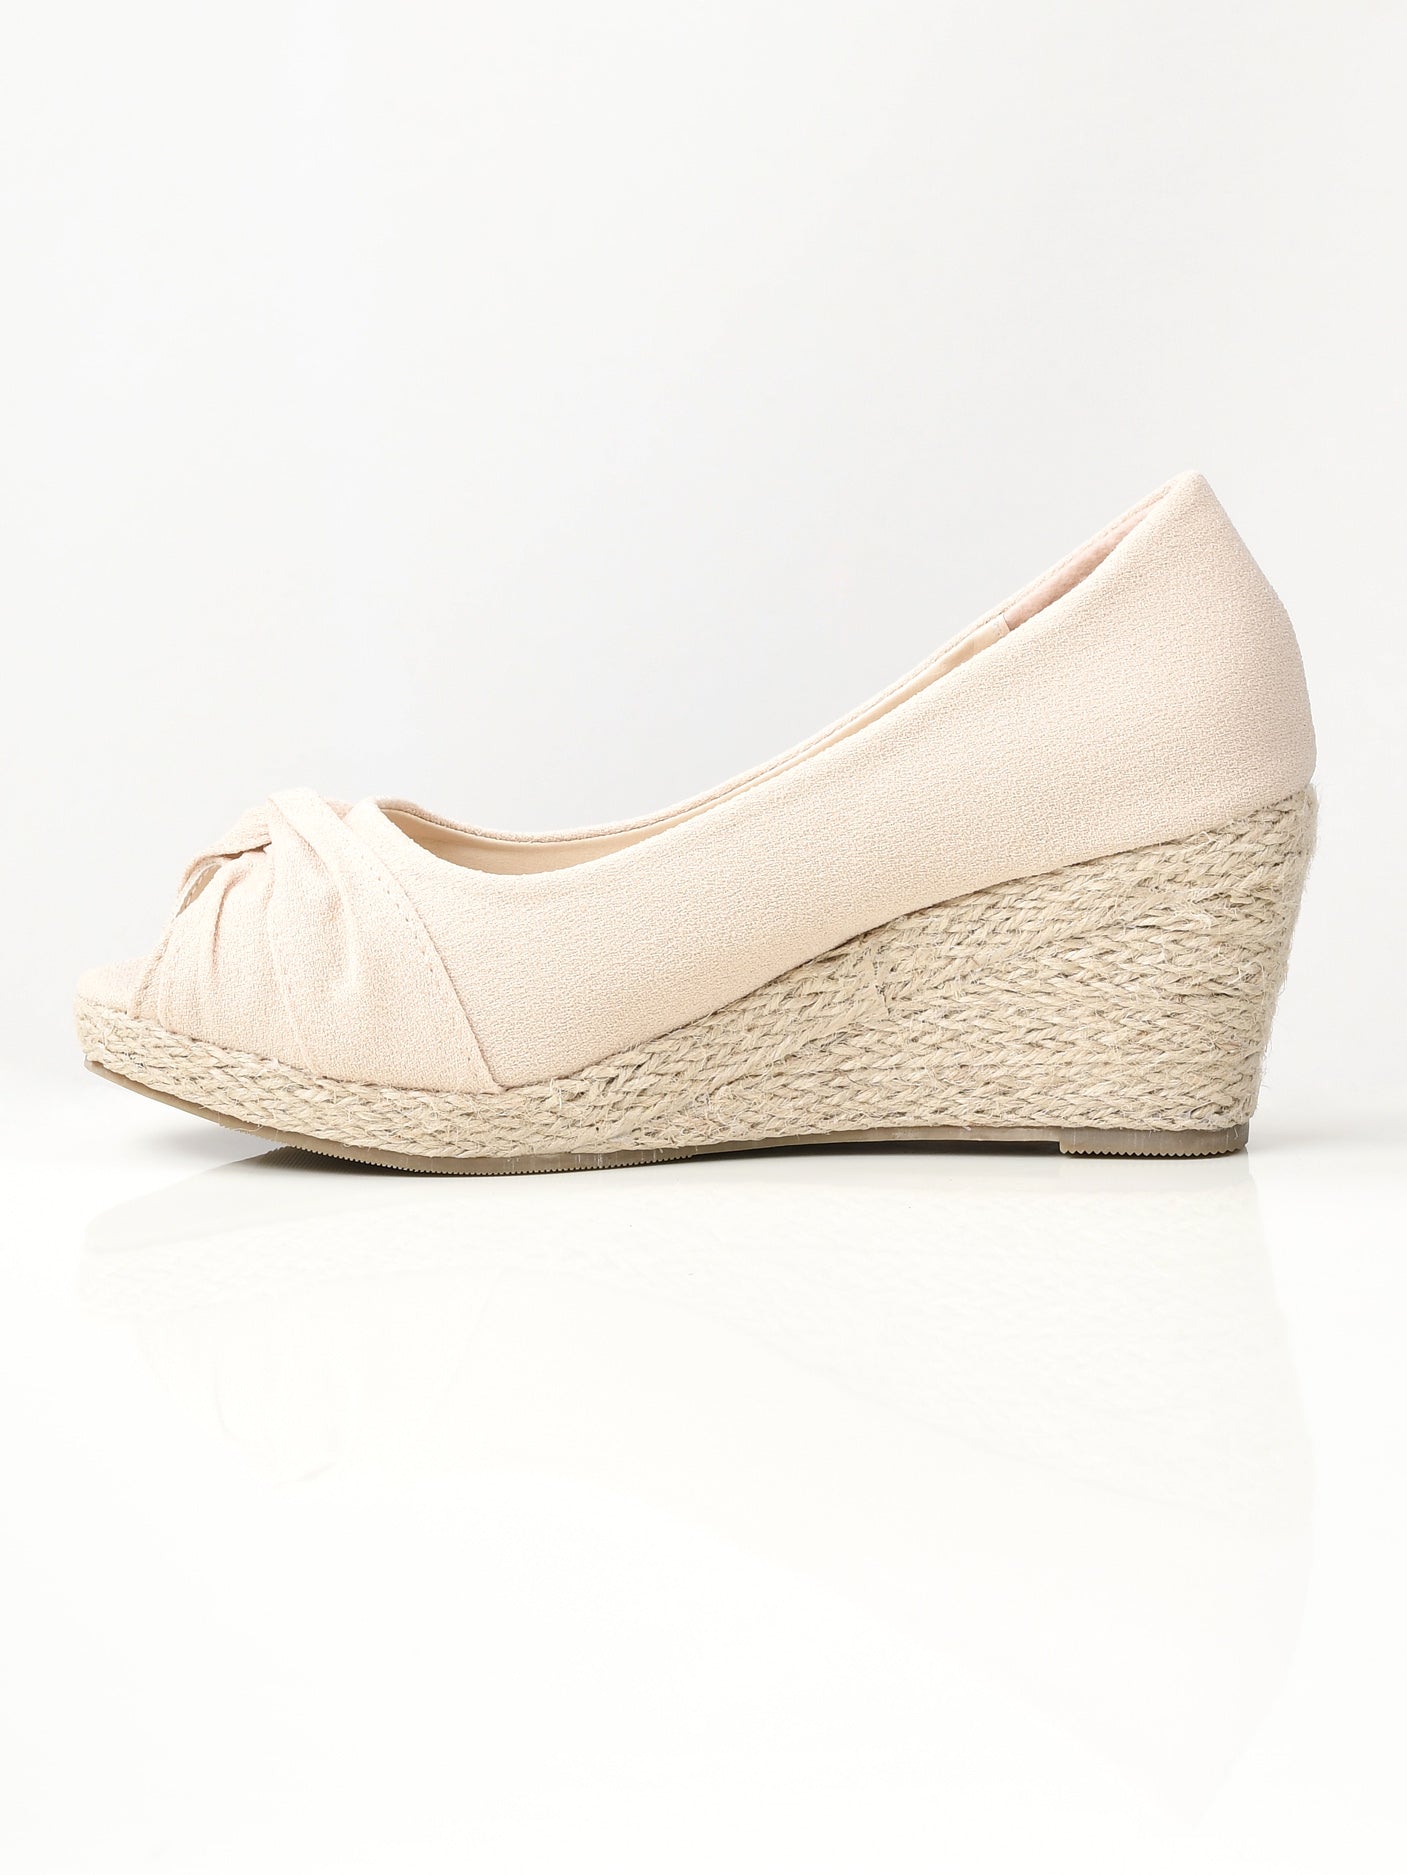 Knotted Weave Wedges - Cream